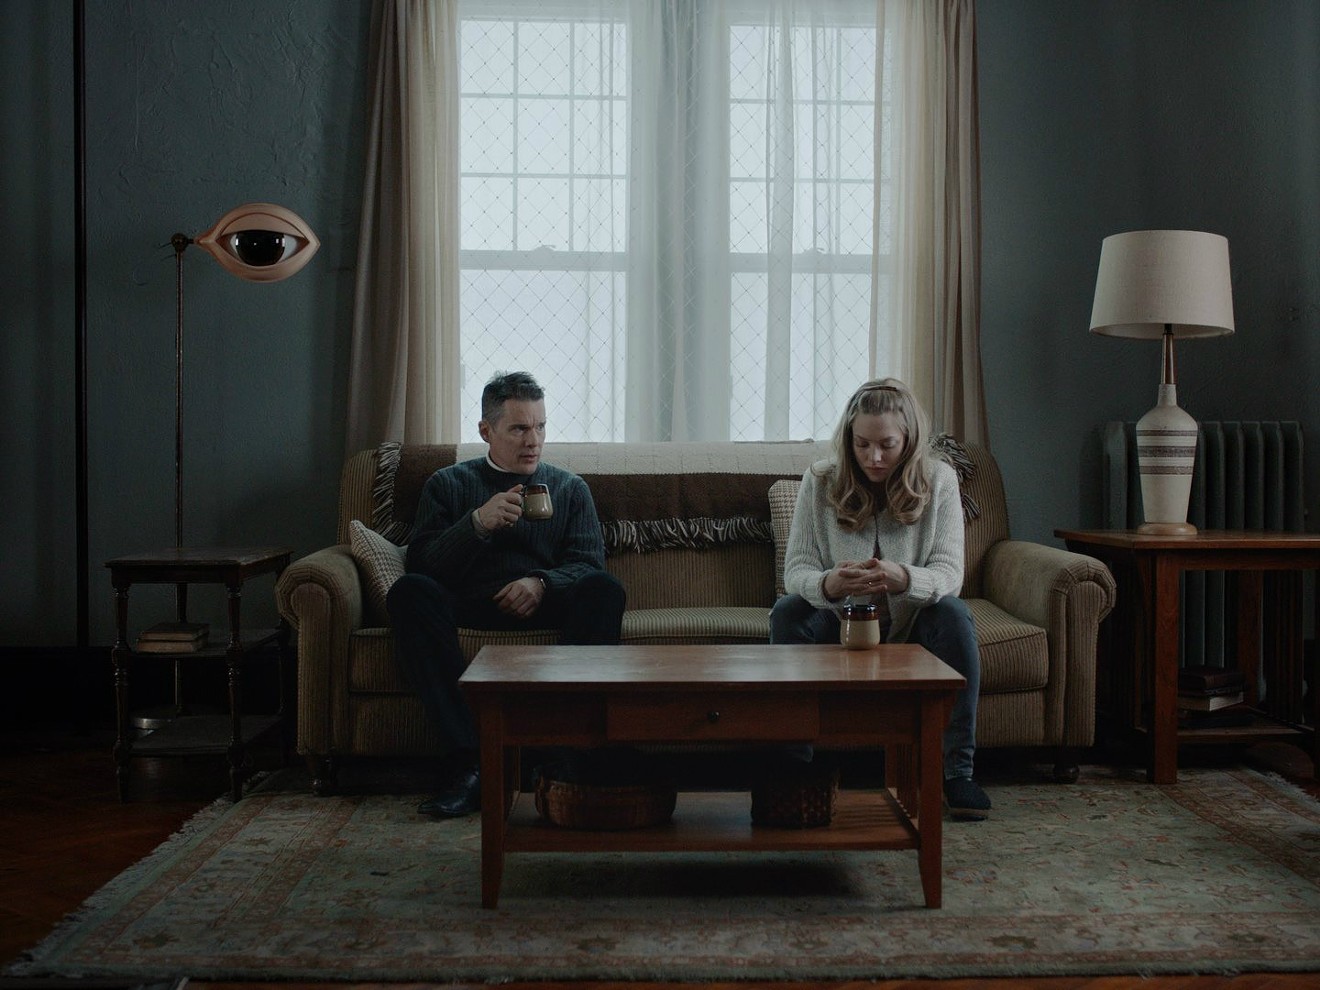 Ethan Hawke (left) plays Ernst Toller, a preacher losing his faith in his institution, and Amanda Seyfried is Mary, a pregnant parishioner who shakes off existential dread and soldiers on, in Paul Schrader’s First Reformed.